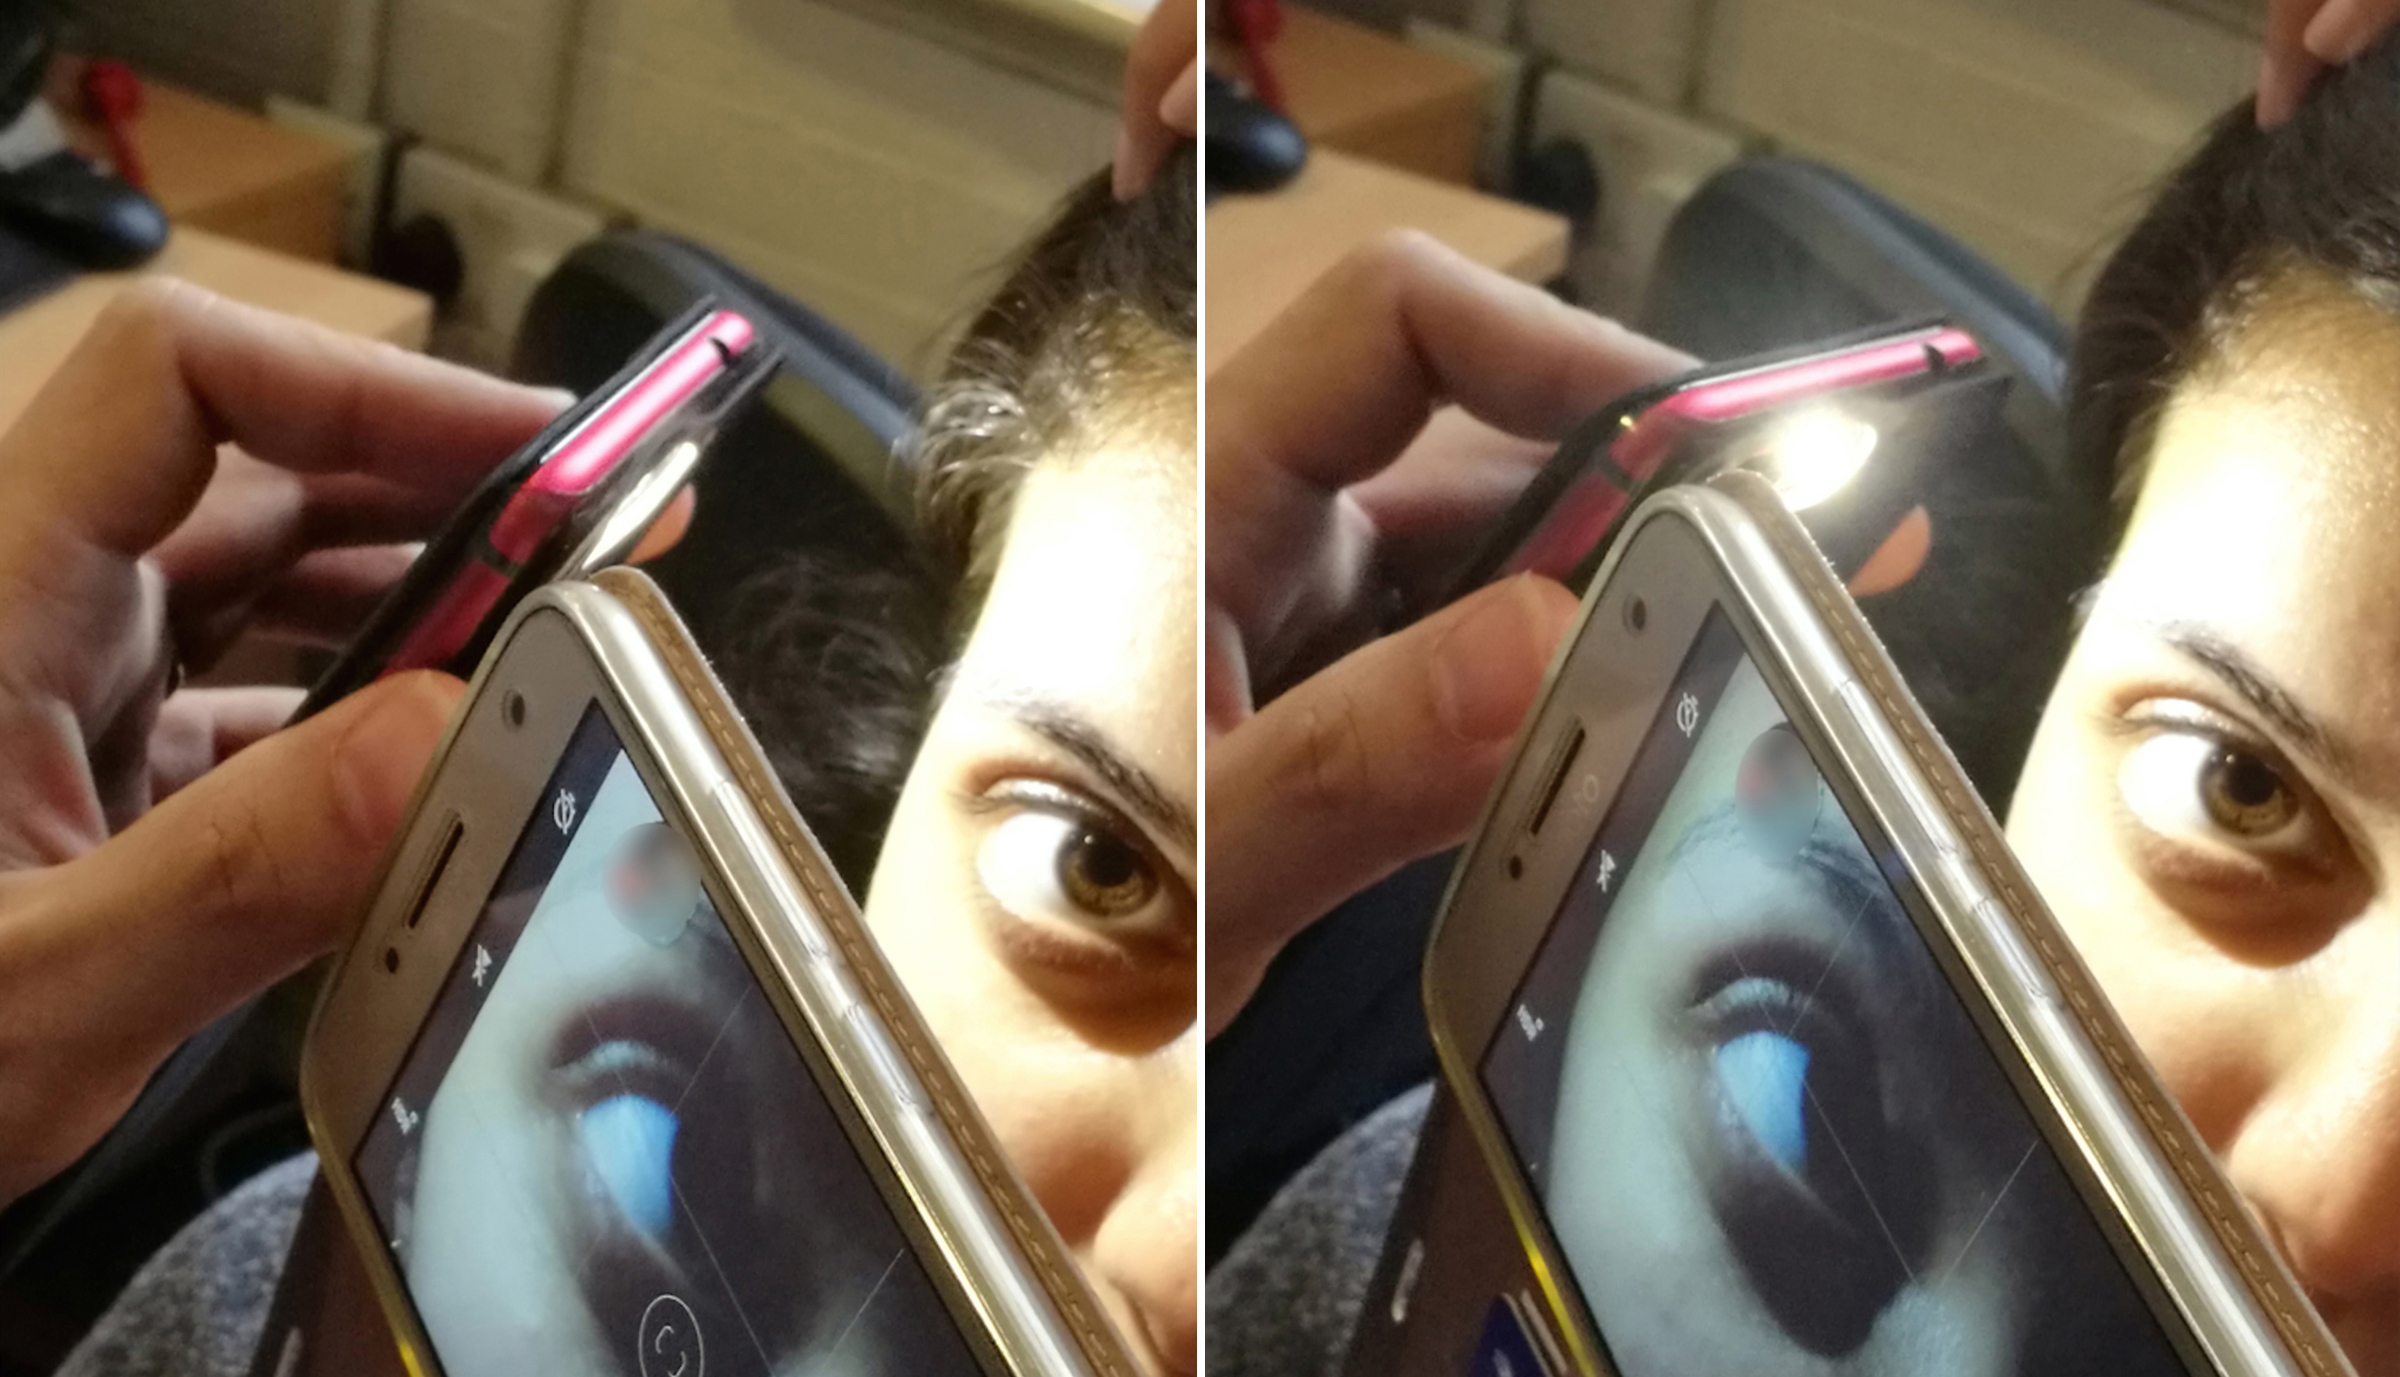 Use of two mobile phones to visualize corneal cystine crystals. A, Smartphone 1 (left) is used as the light source and smartphone 2 (right) captures a close-up image. B, Smartphone 1 is swiveled 30°-45° to obtain the specular reflection effect